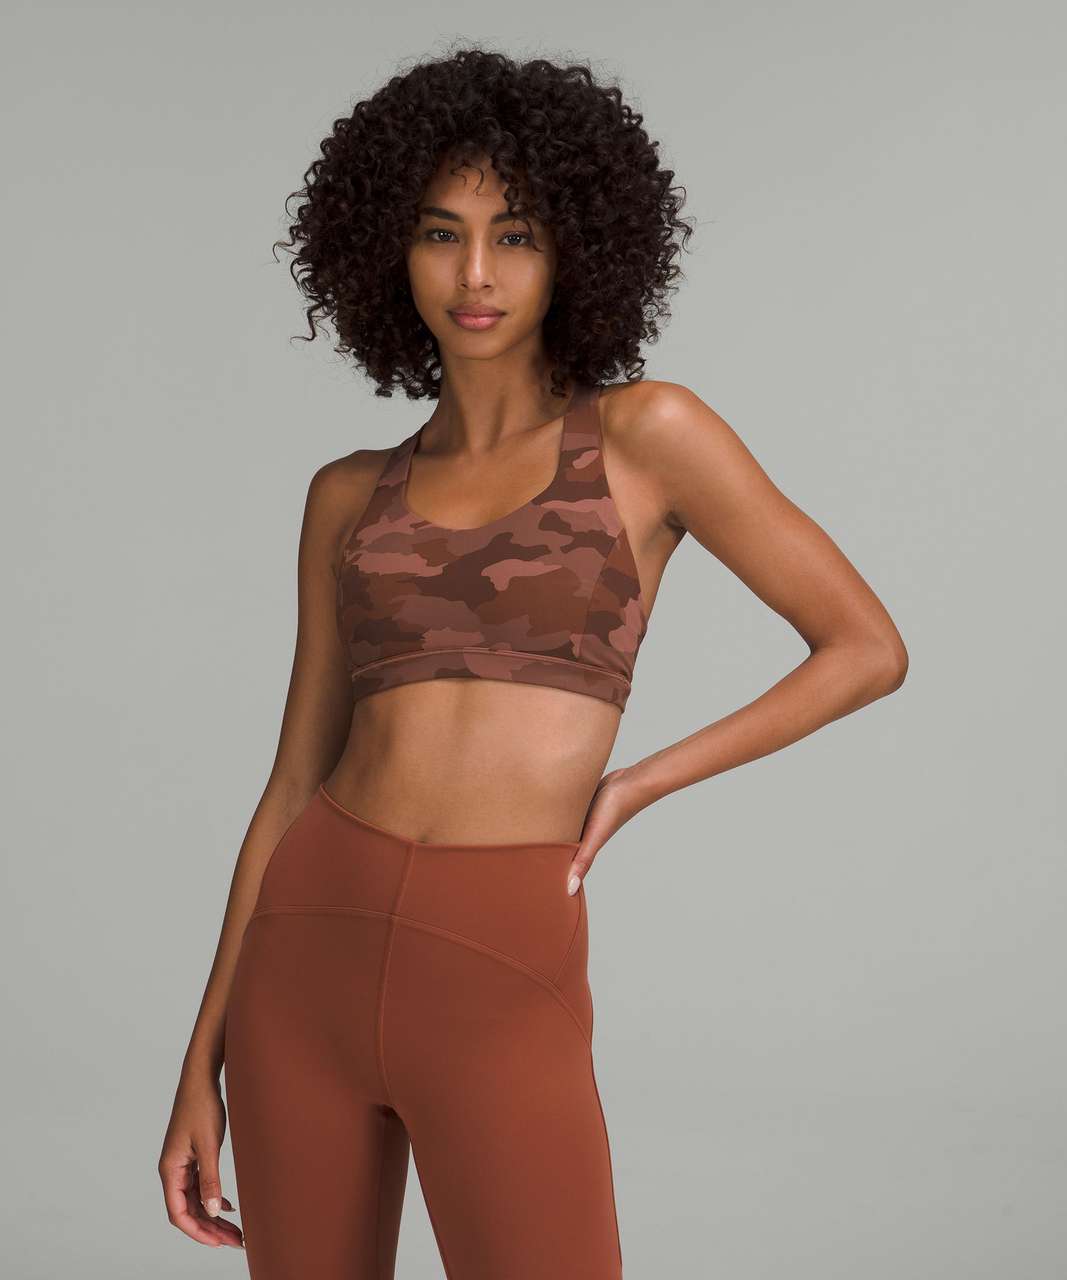 Lululemon Free to Be Serene Bra *Light Support, C/D Cup - Heritage 365 Camo Roasted Brown Multi